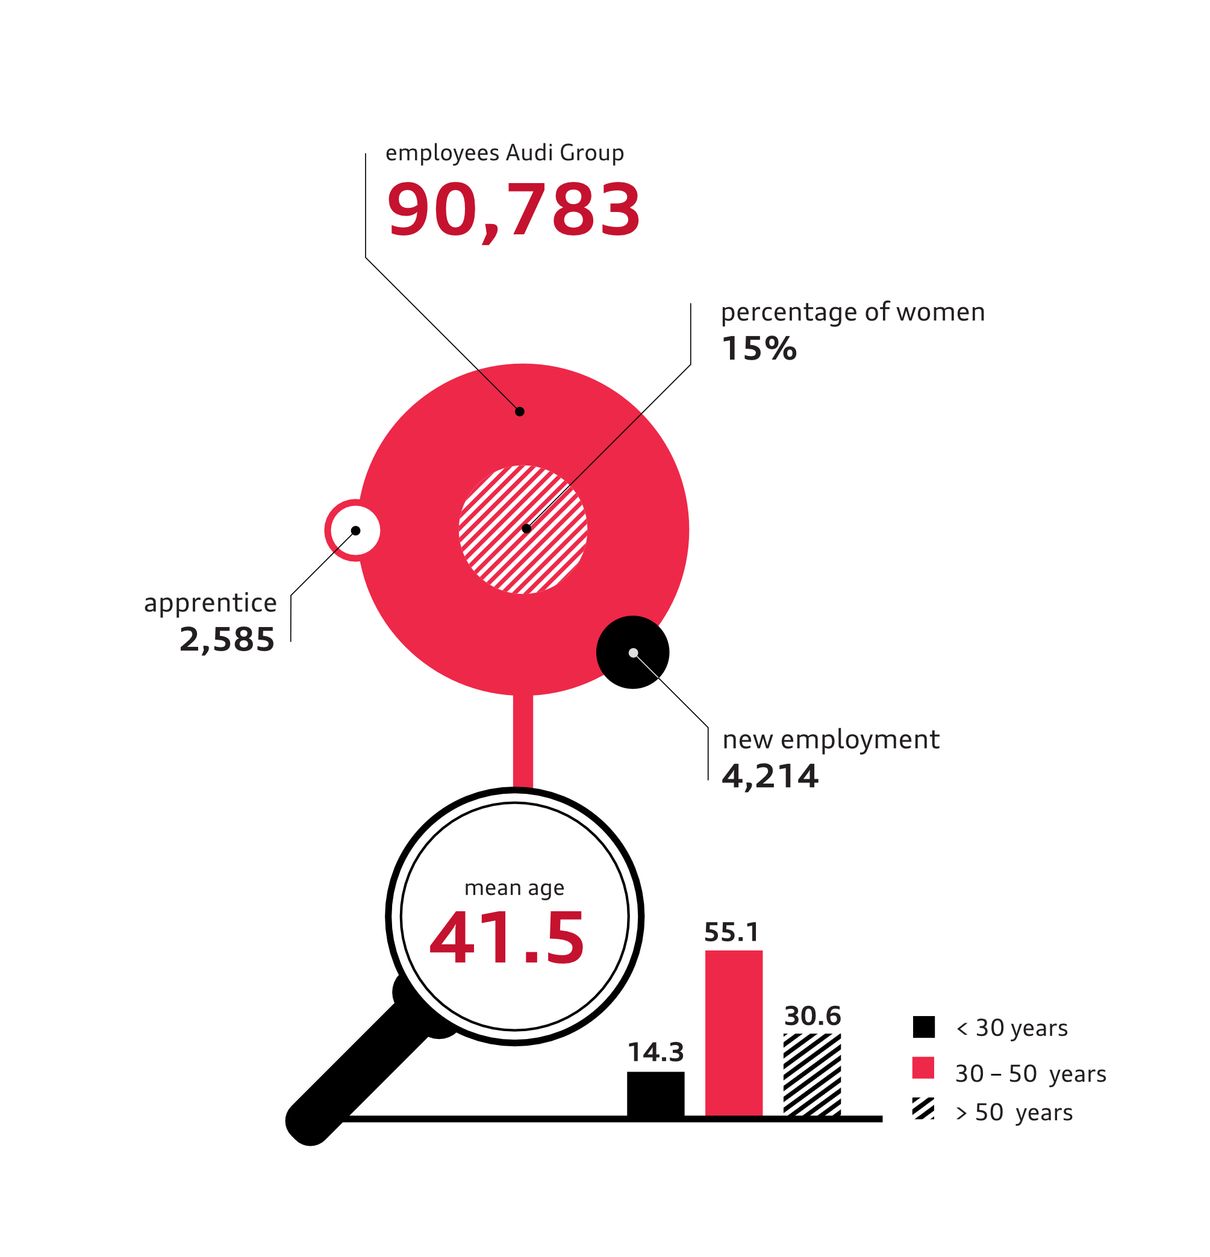 Employees Audi Group 90,783; percentage of women 15 %, apprentice 2,585; new employment 4,214; mean age 41.5